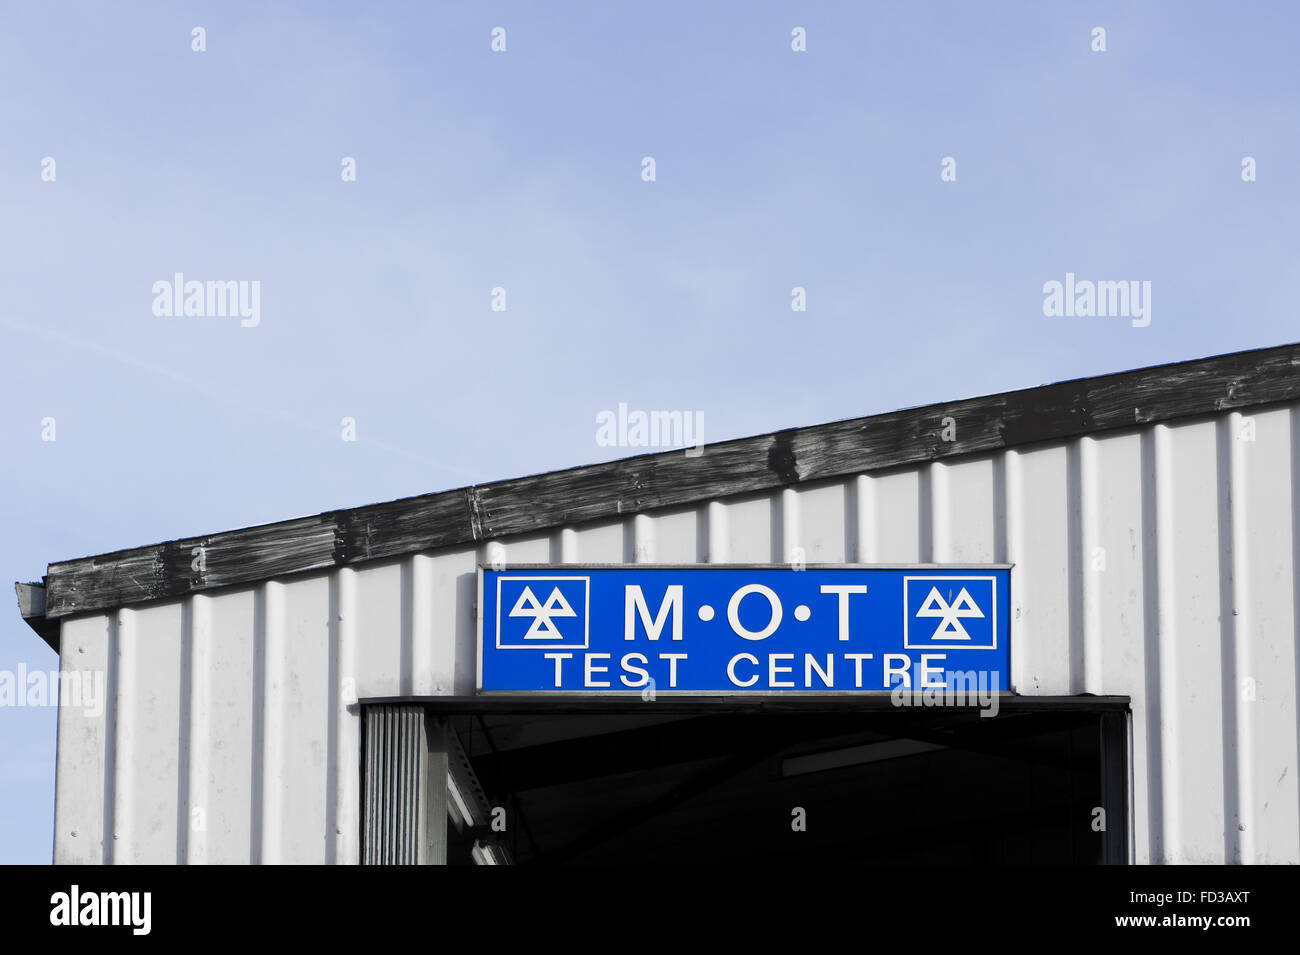 The sign for an MOT vehicle test centre in the UK Stock Photo